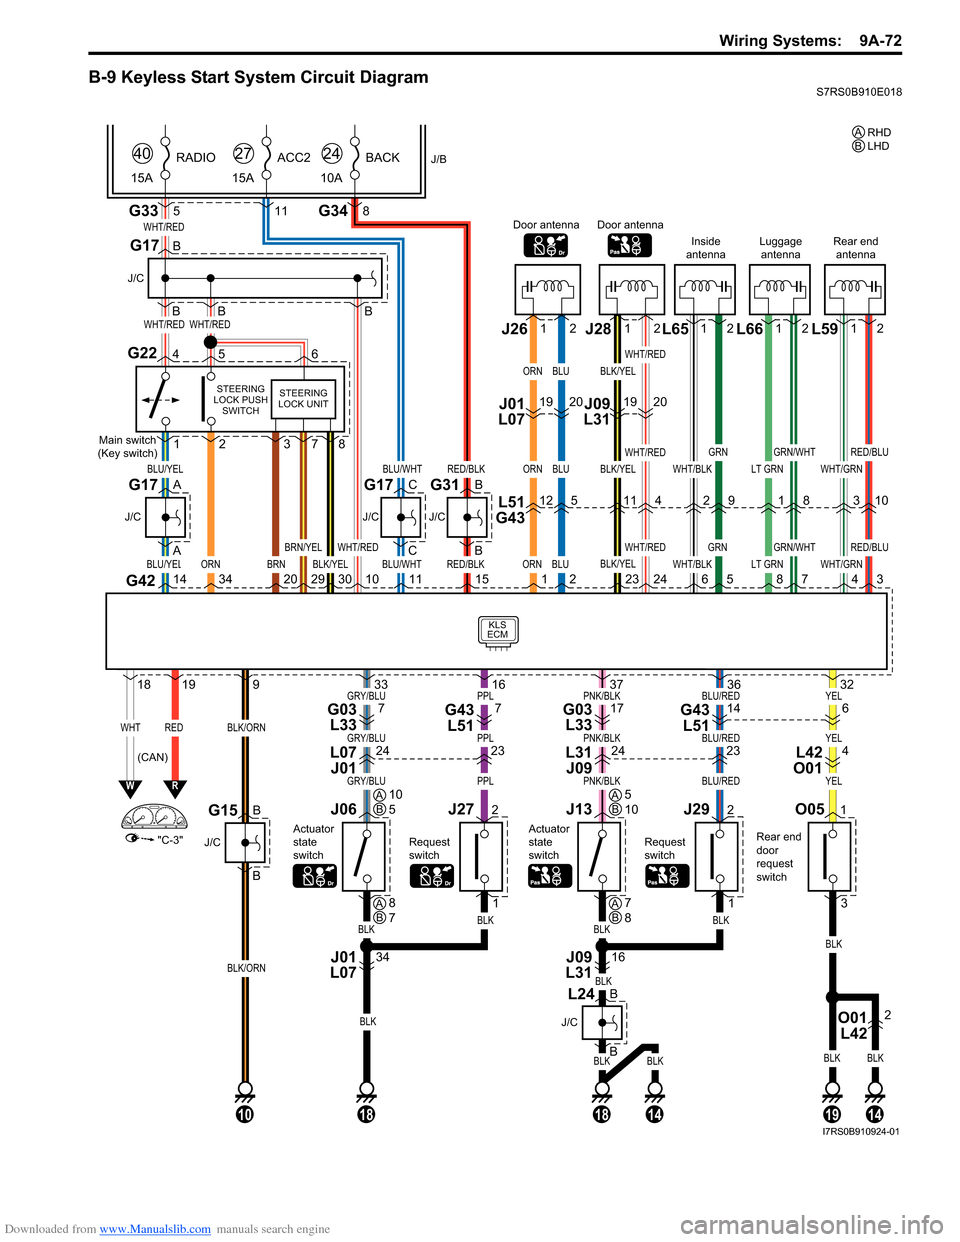 SUZUKI SWIFT 2008 2.G Service Owners Guide Downloaded from www.Manualslib.com manuals search engine Wiring Systems:  9A-72
B-9 Keyless Start System Circuit DiagramS7RS0B910E018
BLKBLK
BLK
BLKBLK
YELBLU/REDPNK/BLKPPLGRY/BLU
YELBLU/REDPNK/BLKPPL